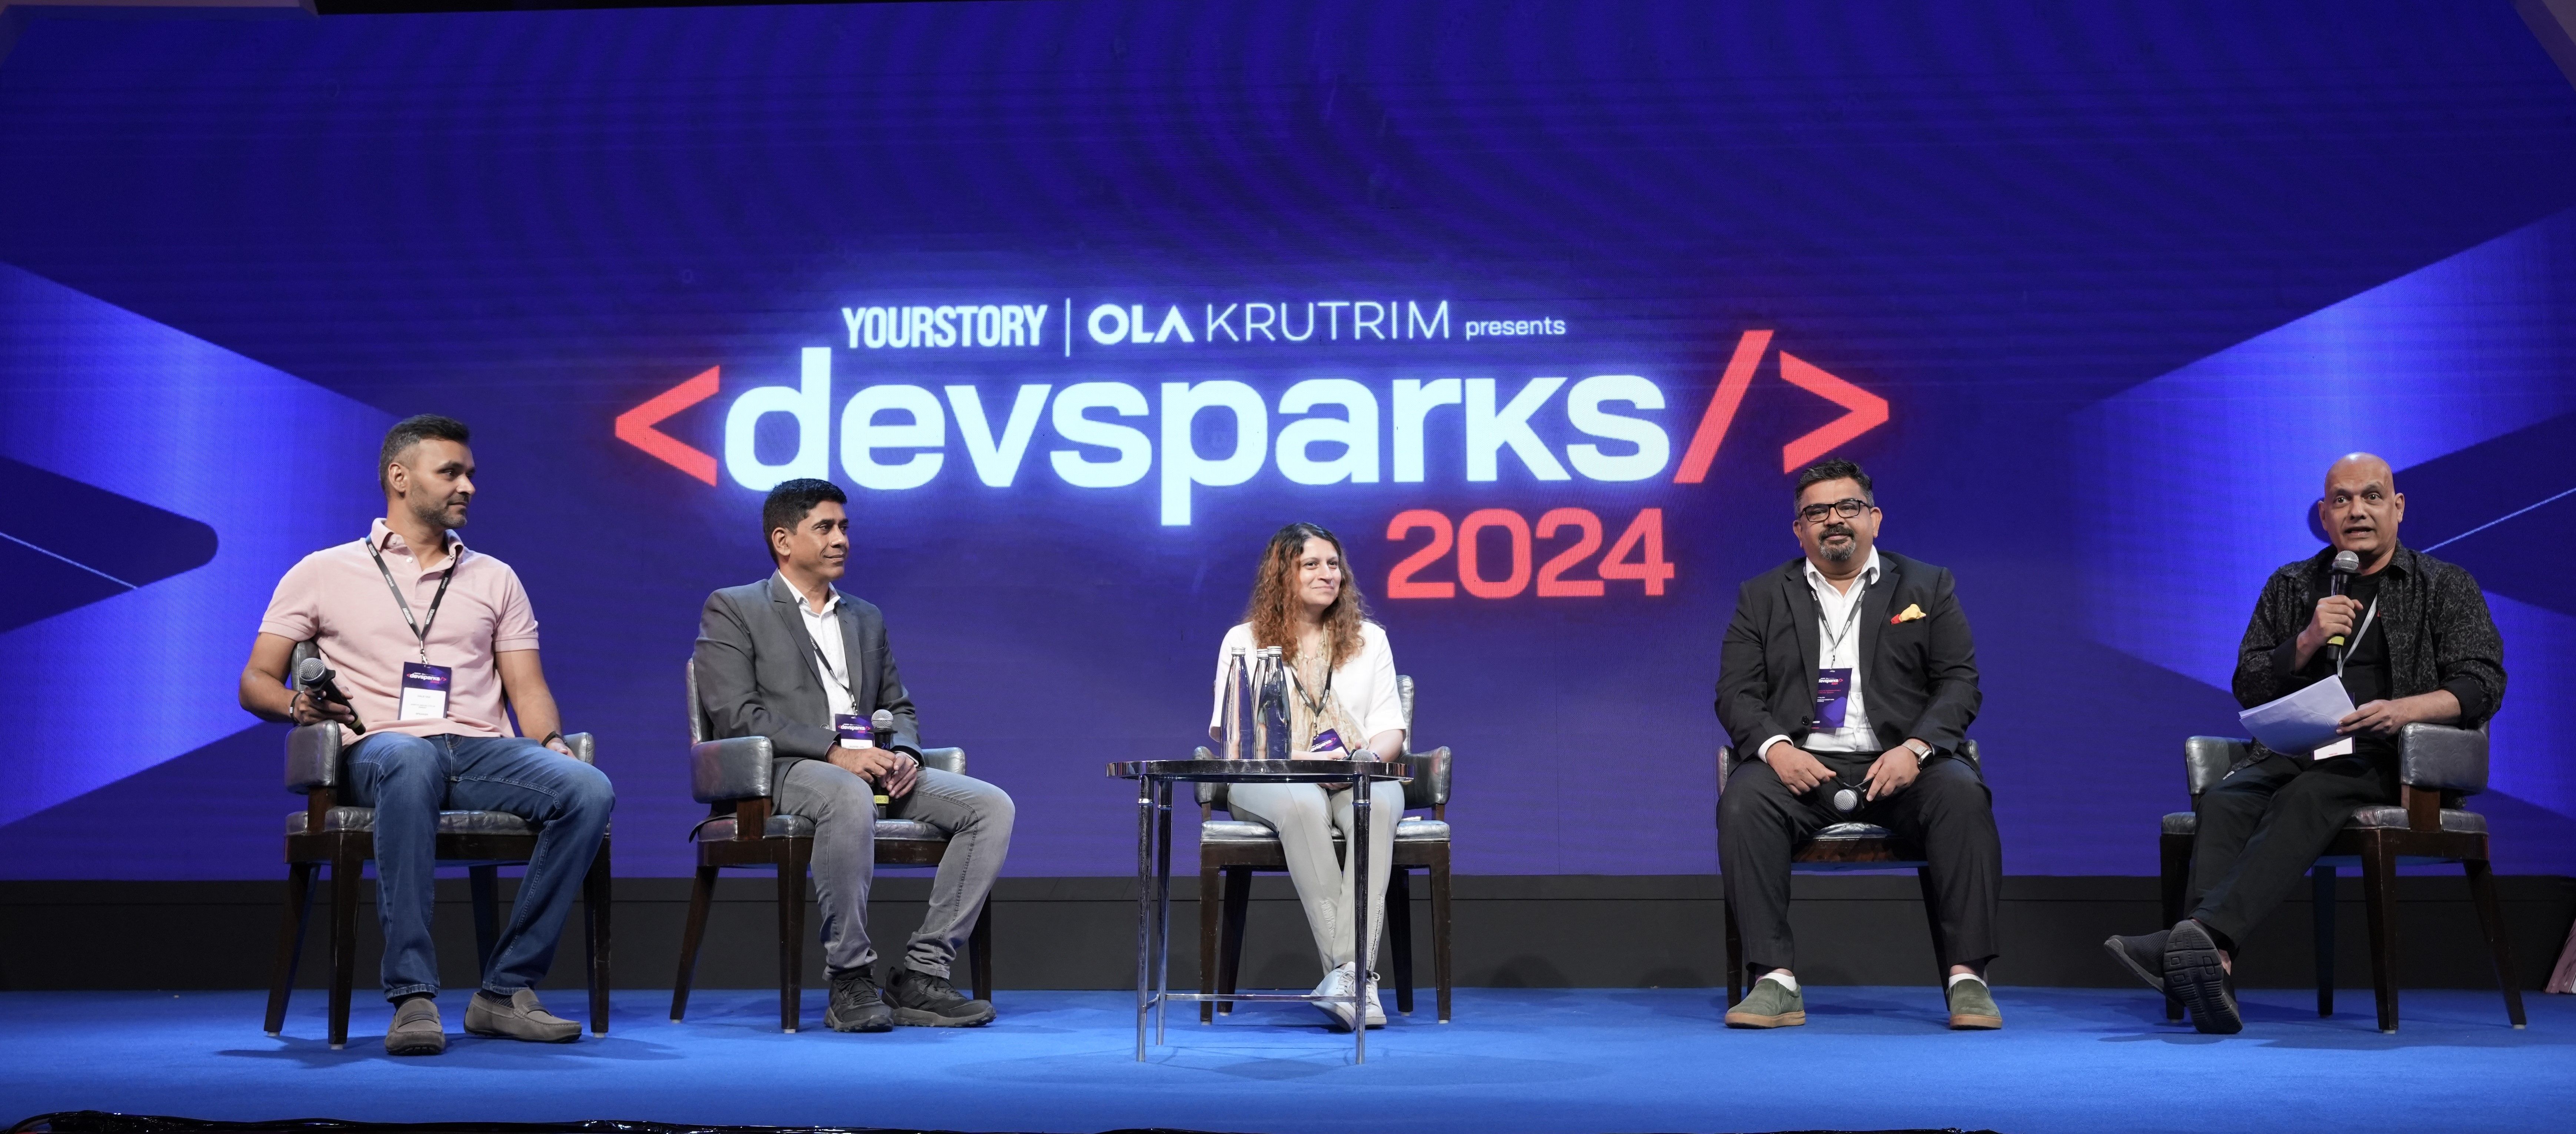 AI offers innumerable opportunities for developers, say experts at DevSparks summit